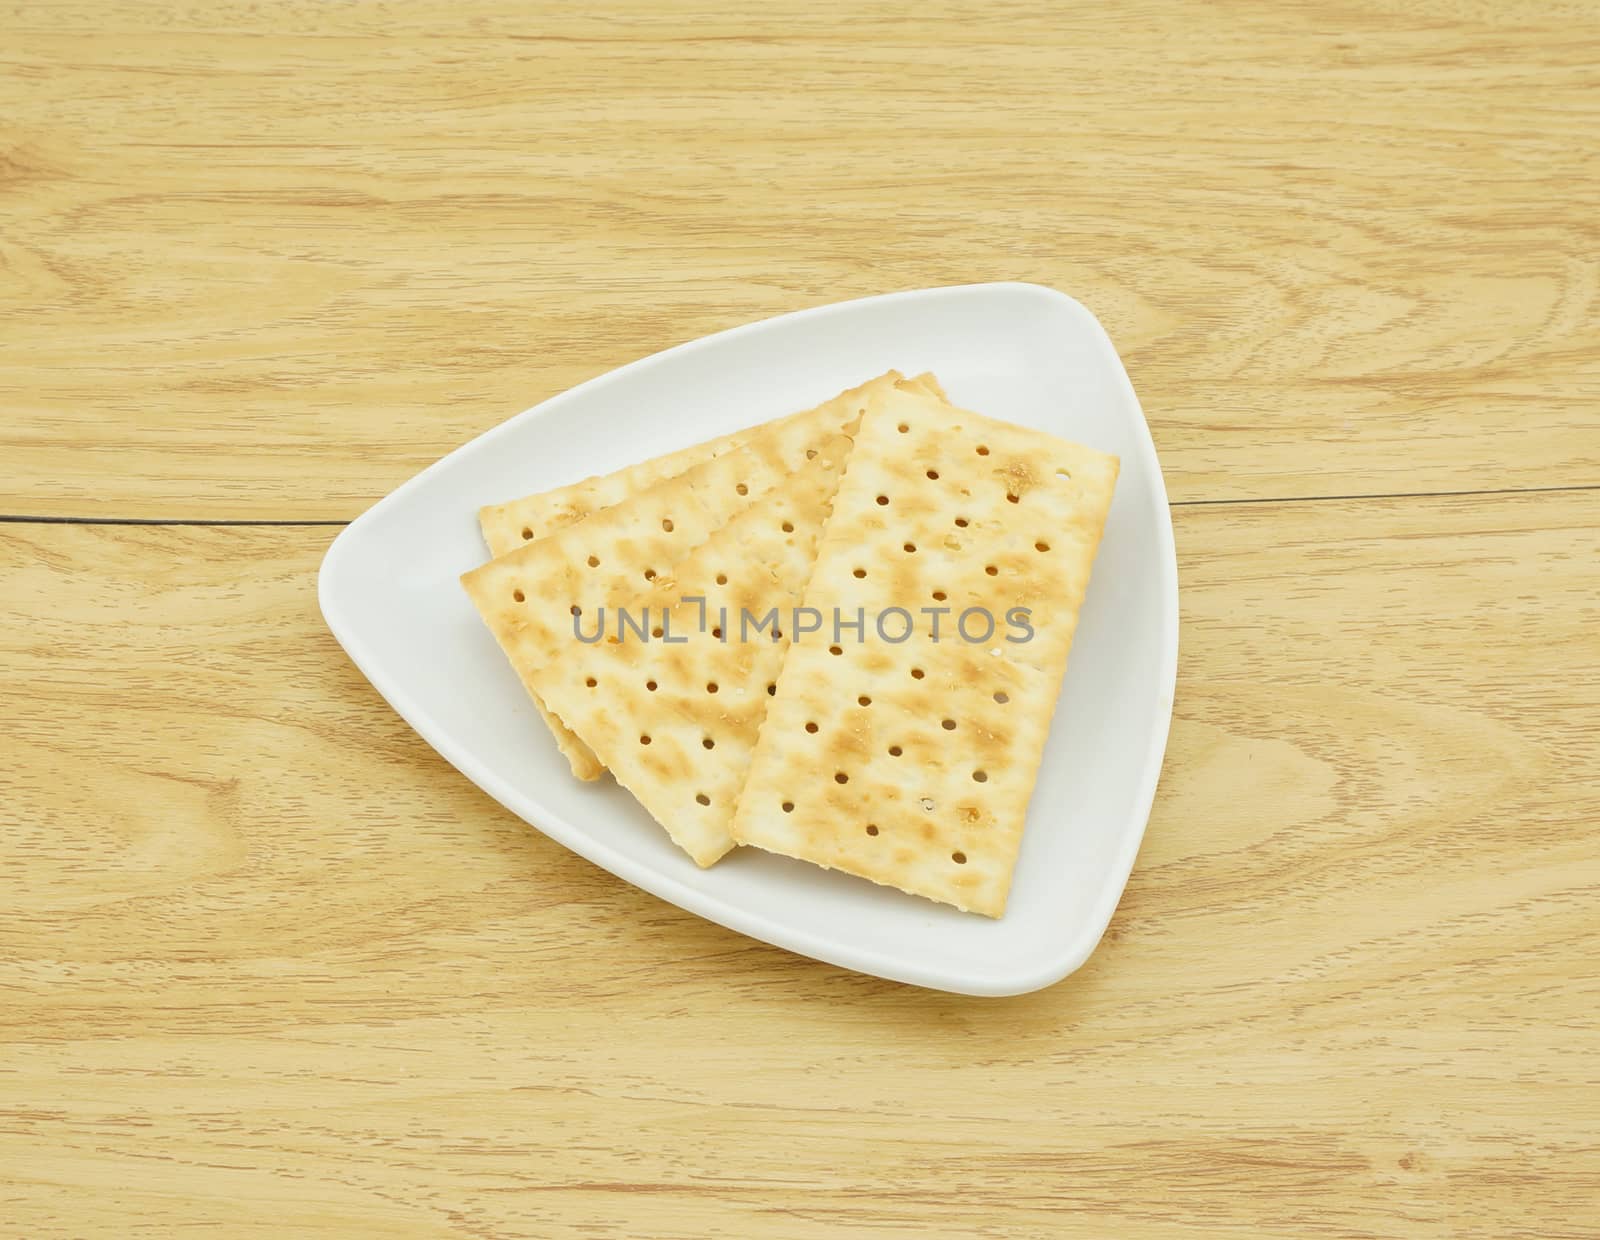 The biscuits have square shaped, good sized,
placed in a white plate.                             